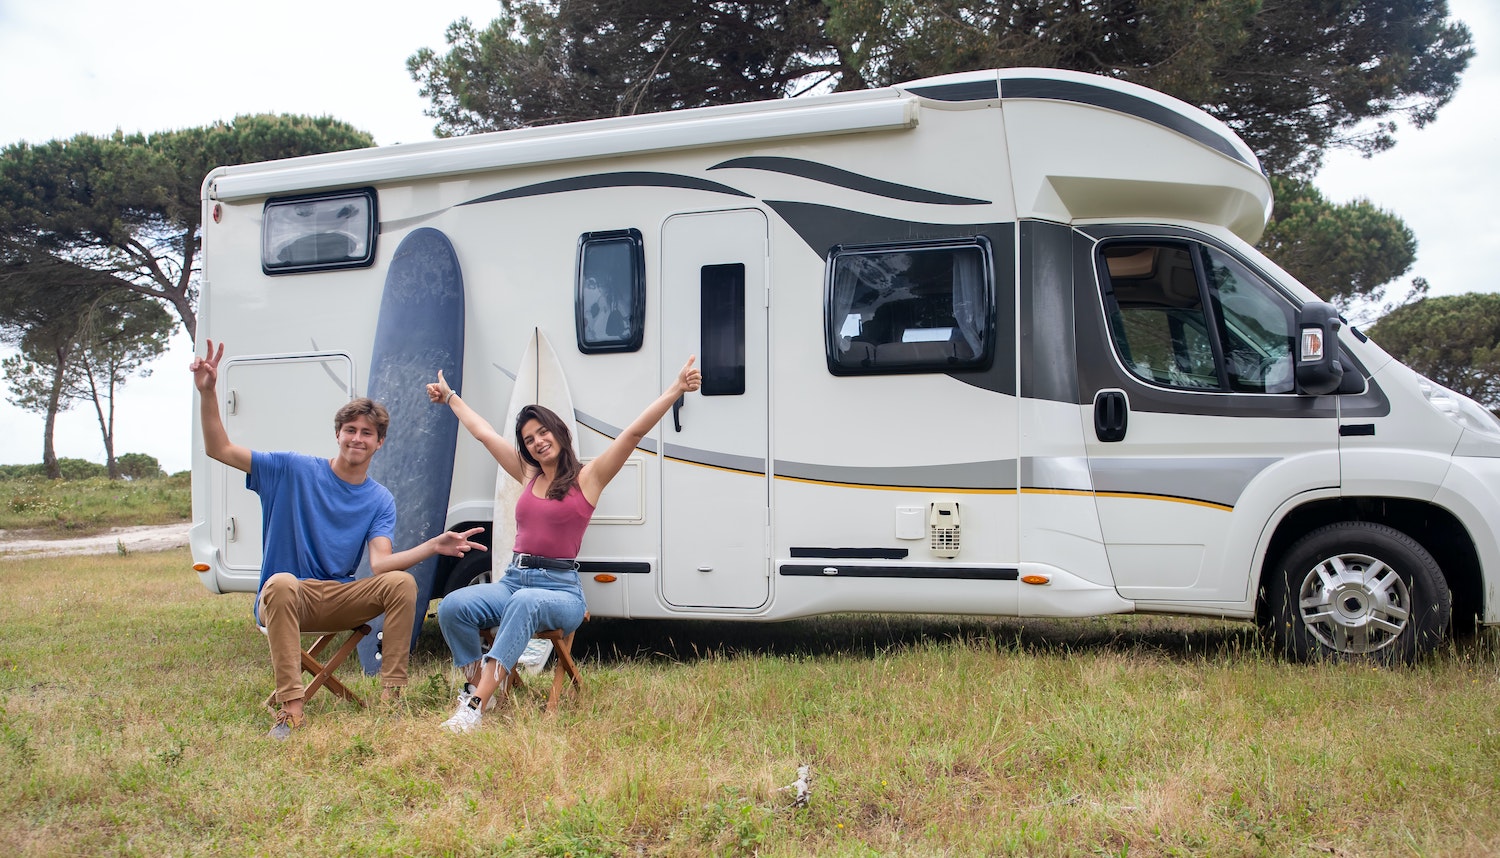 Be ready for RV rental season and beyond